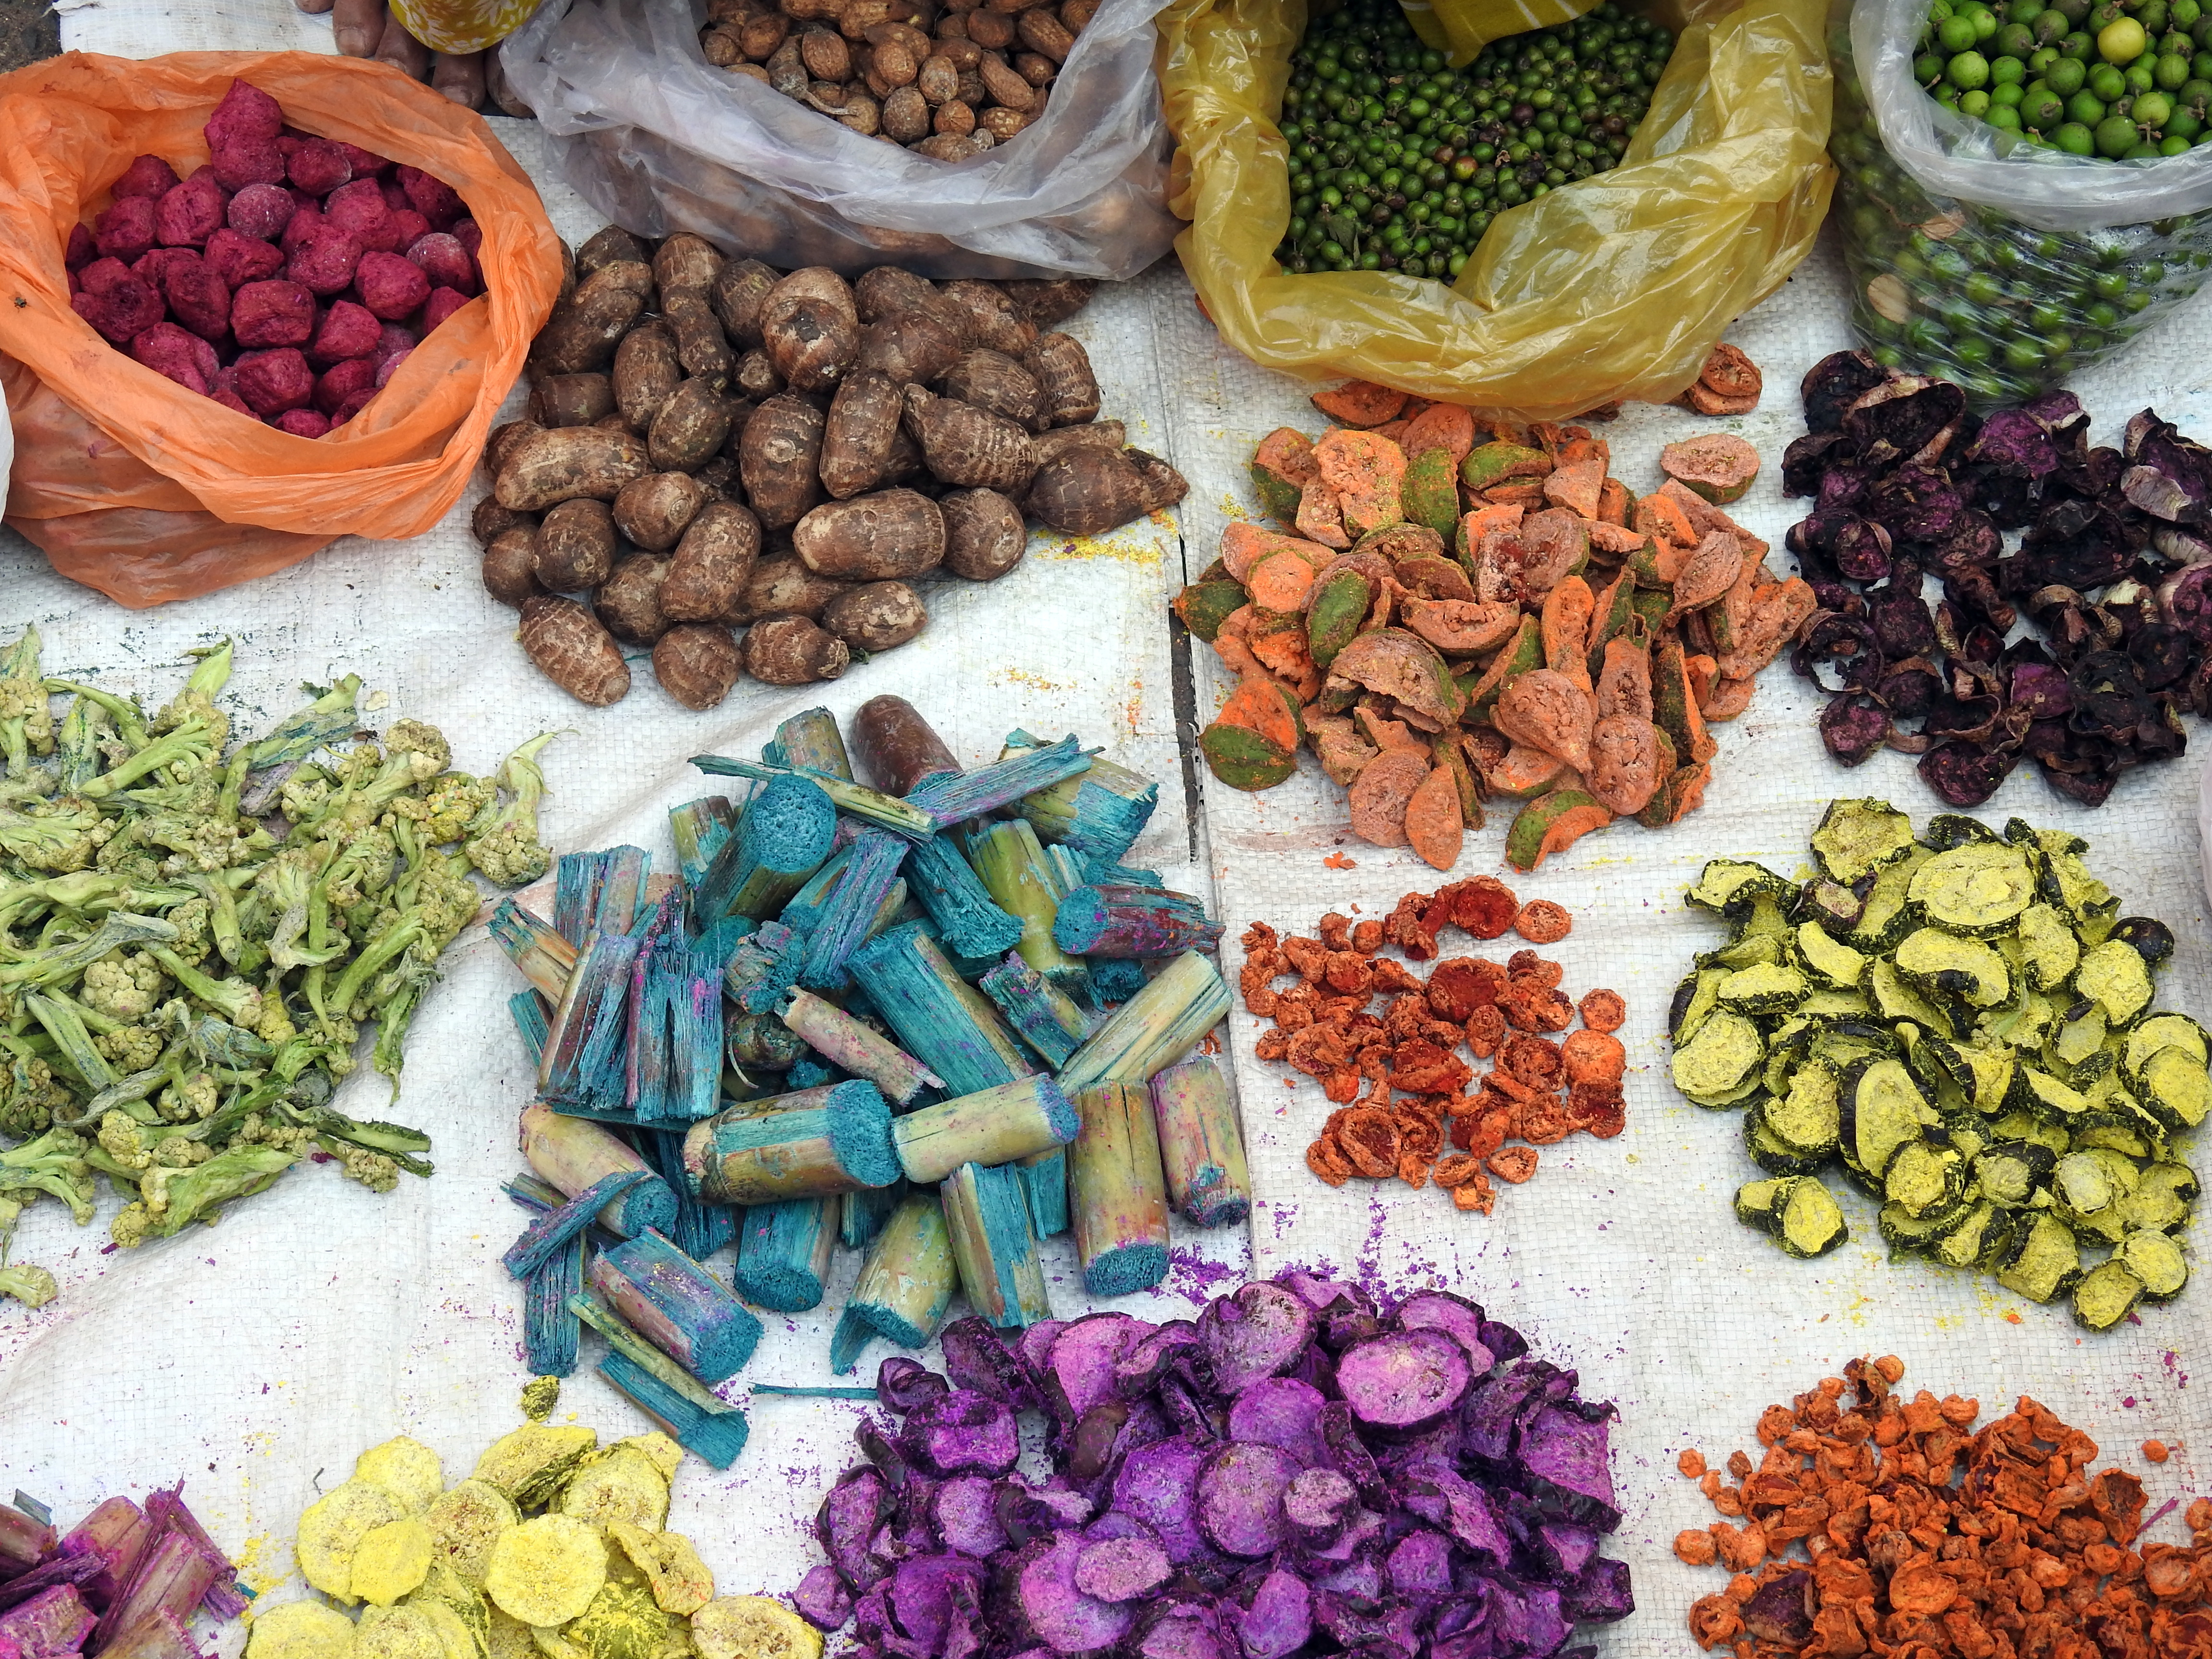 Local dried vegetables being sold in Bhopal's Chowk